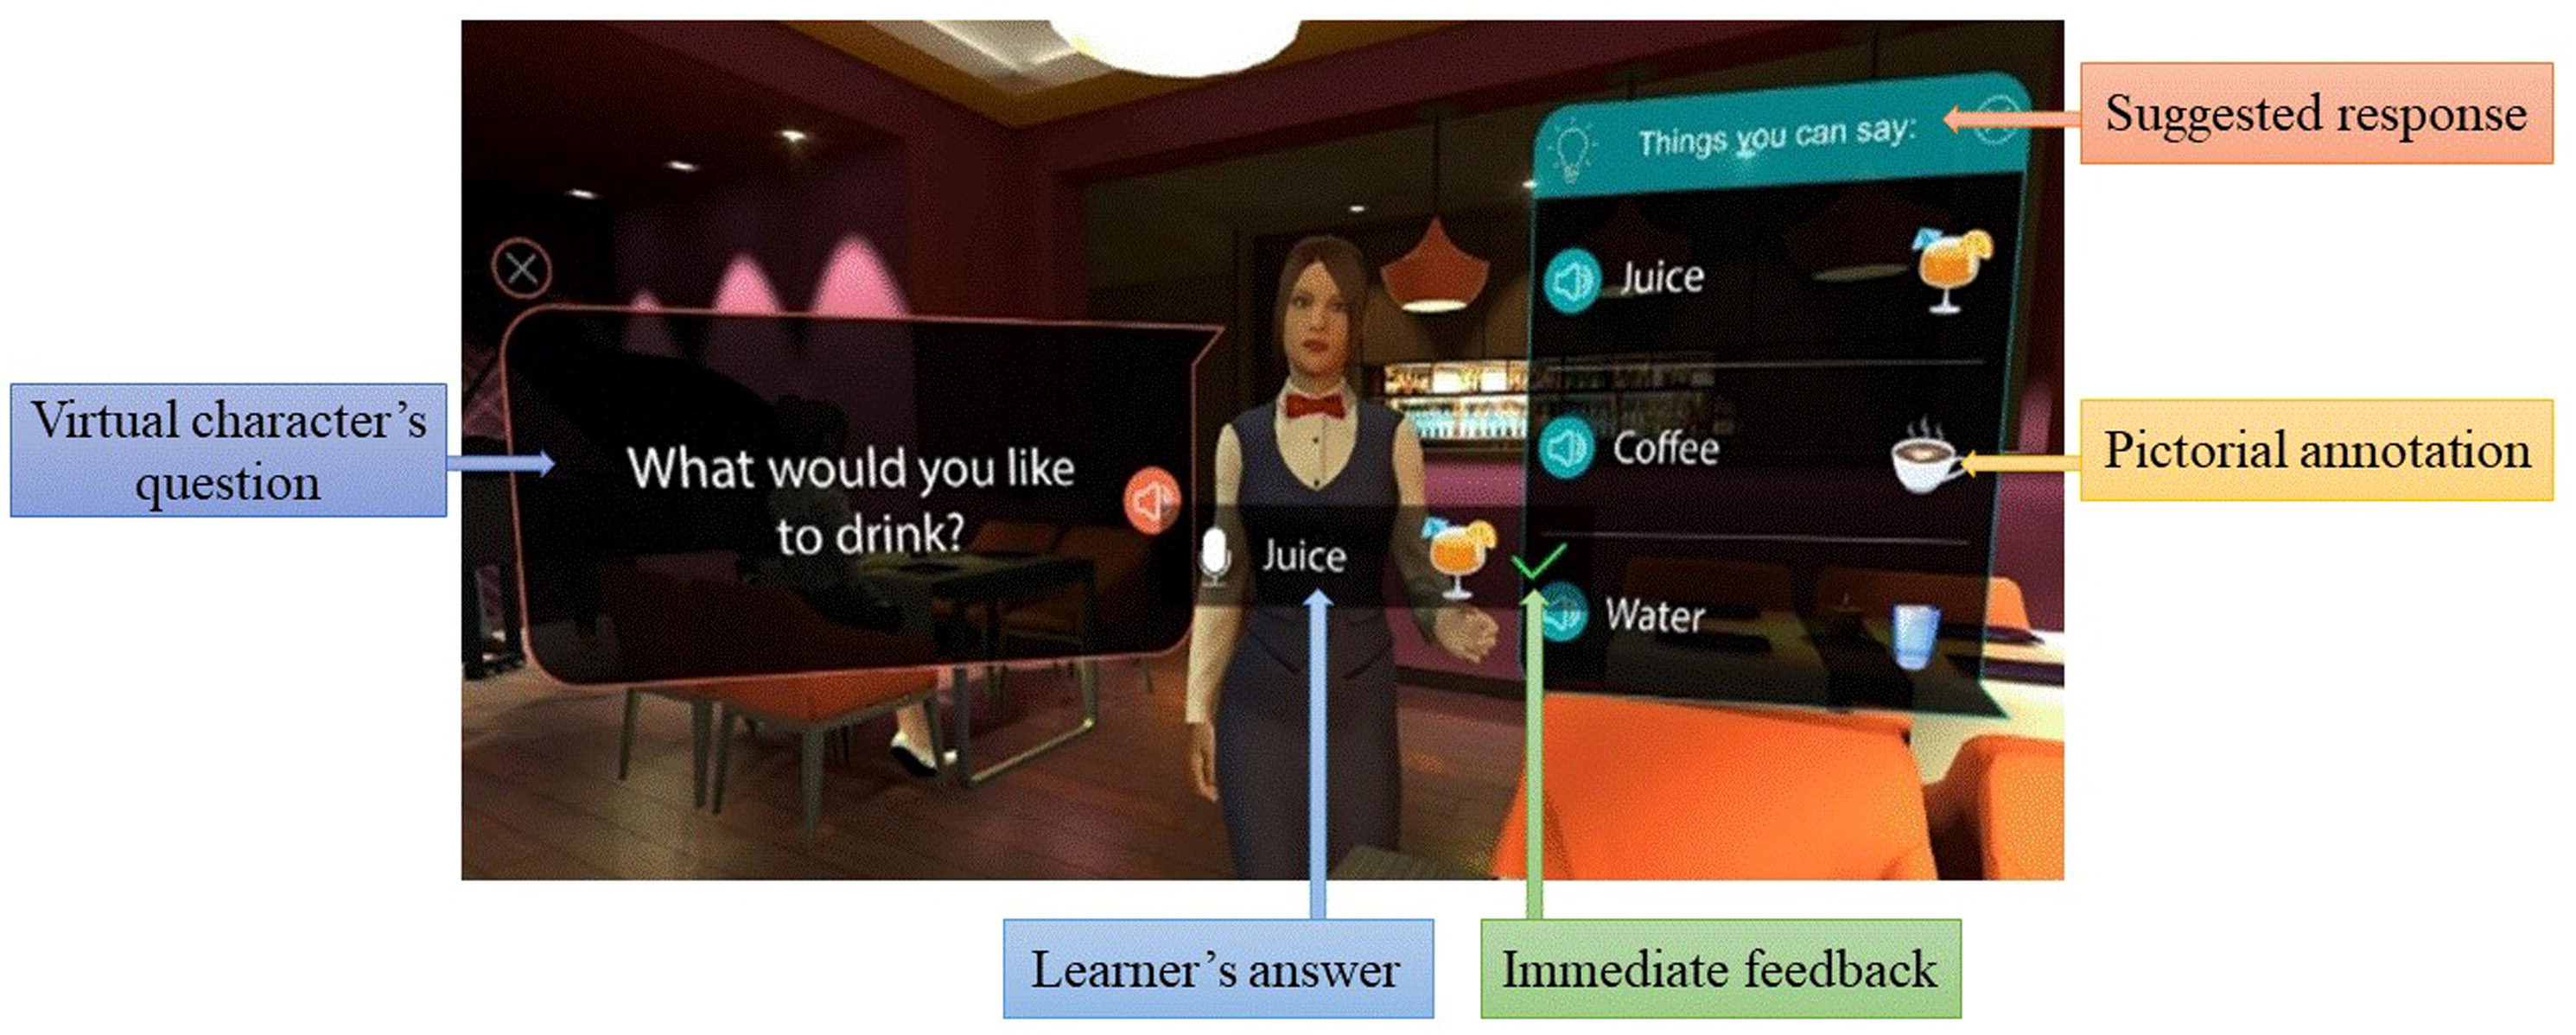 Figure 1. An example of interacting with a virtual character.